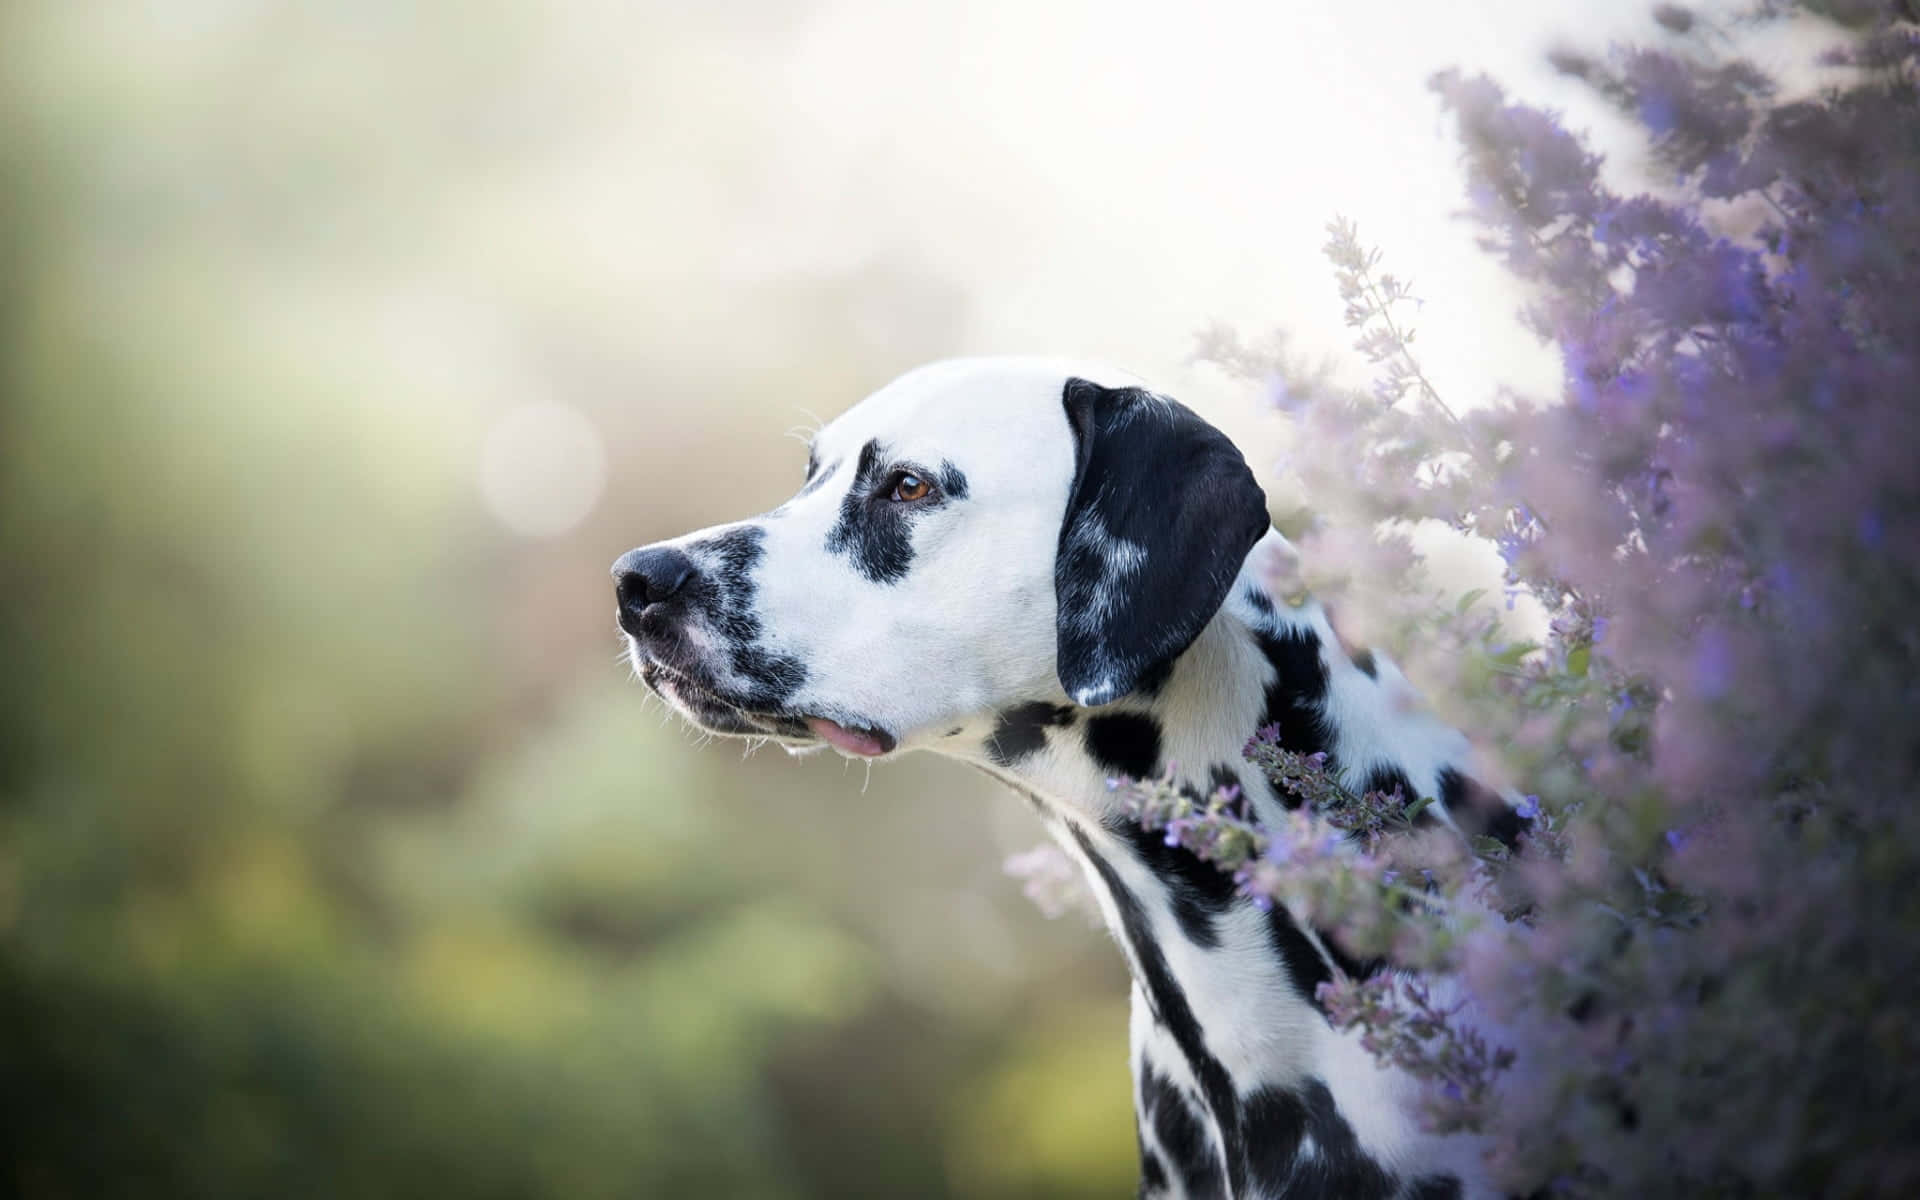 A cute brown and white Dalmation pup